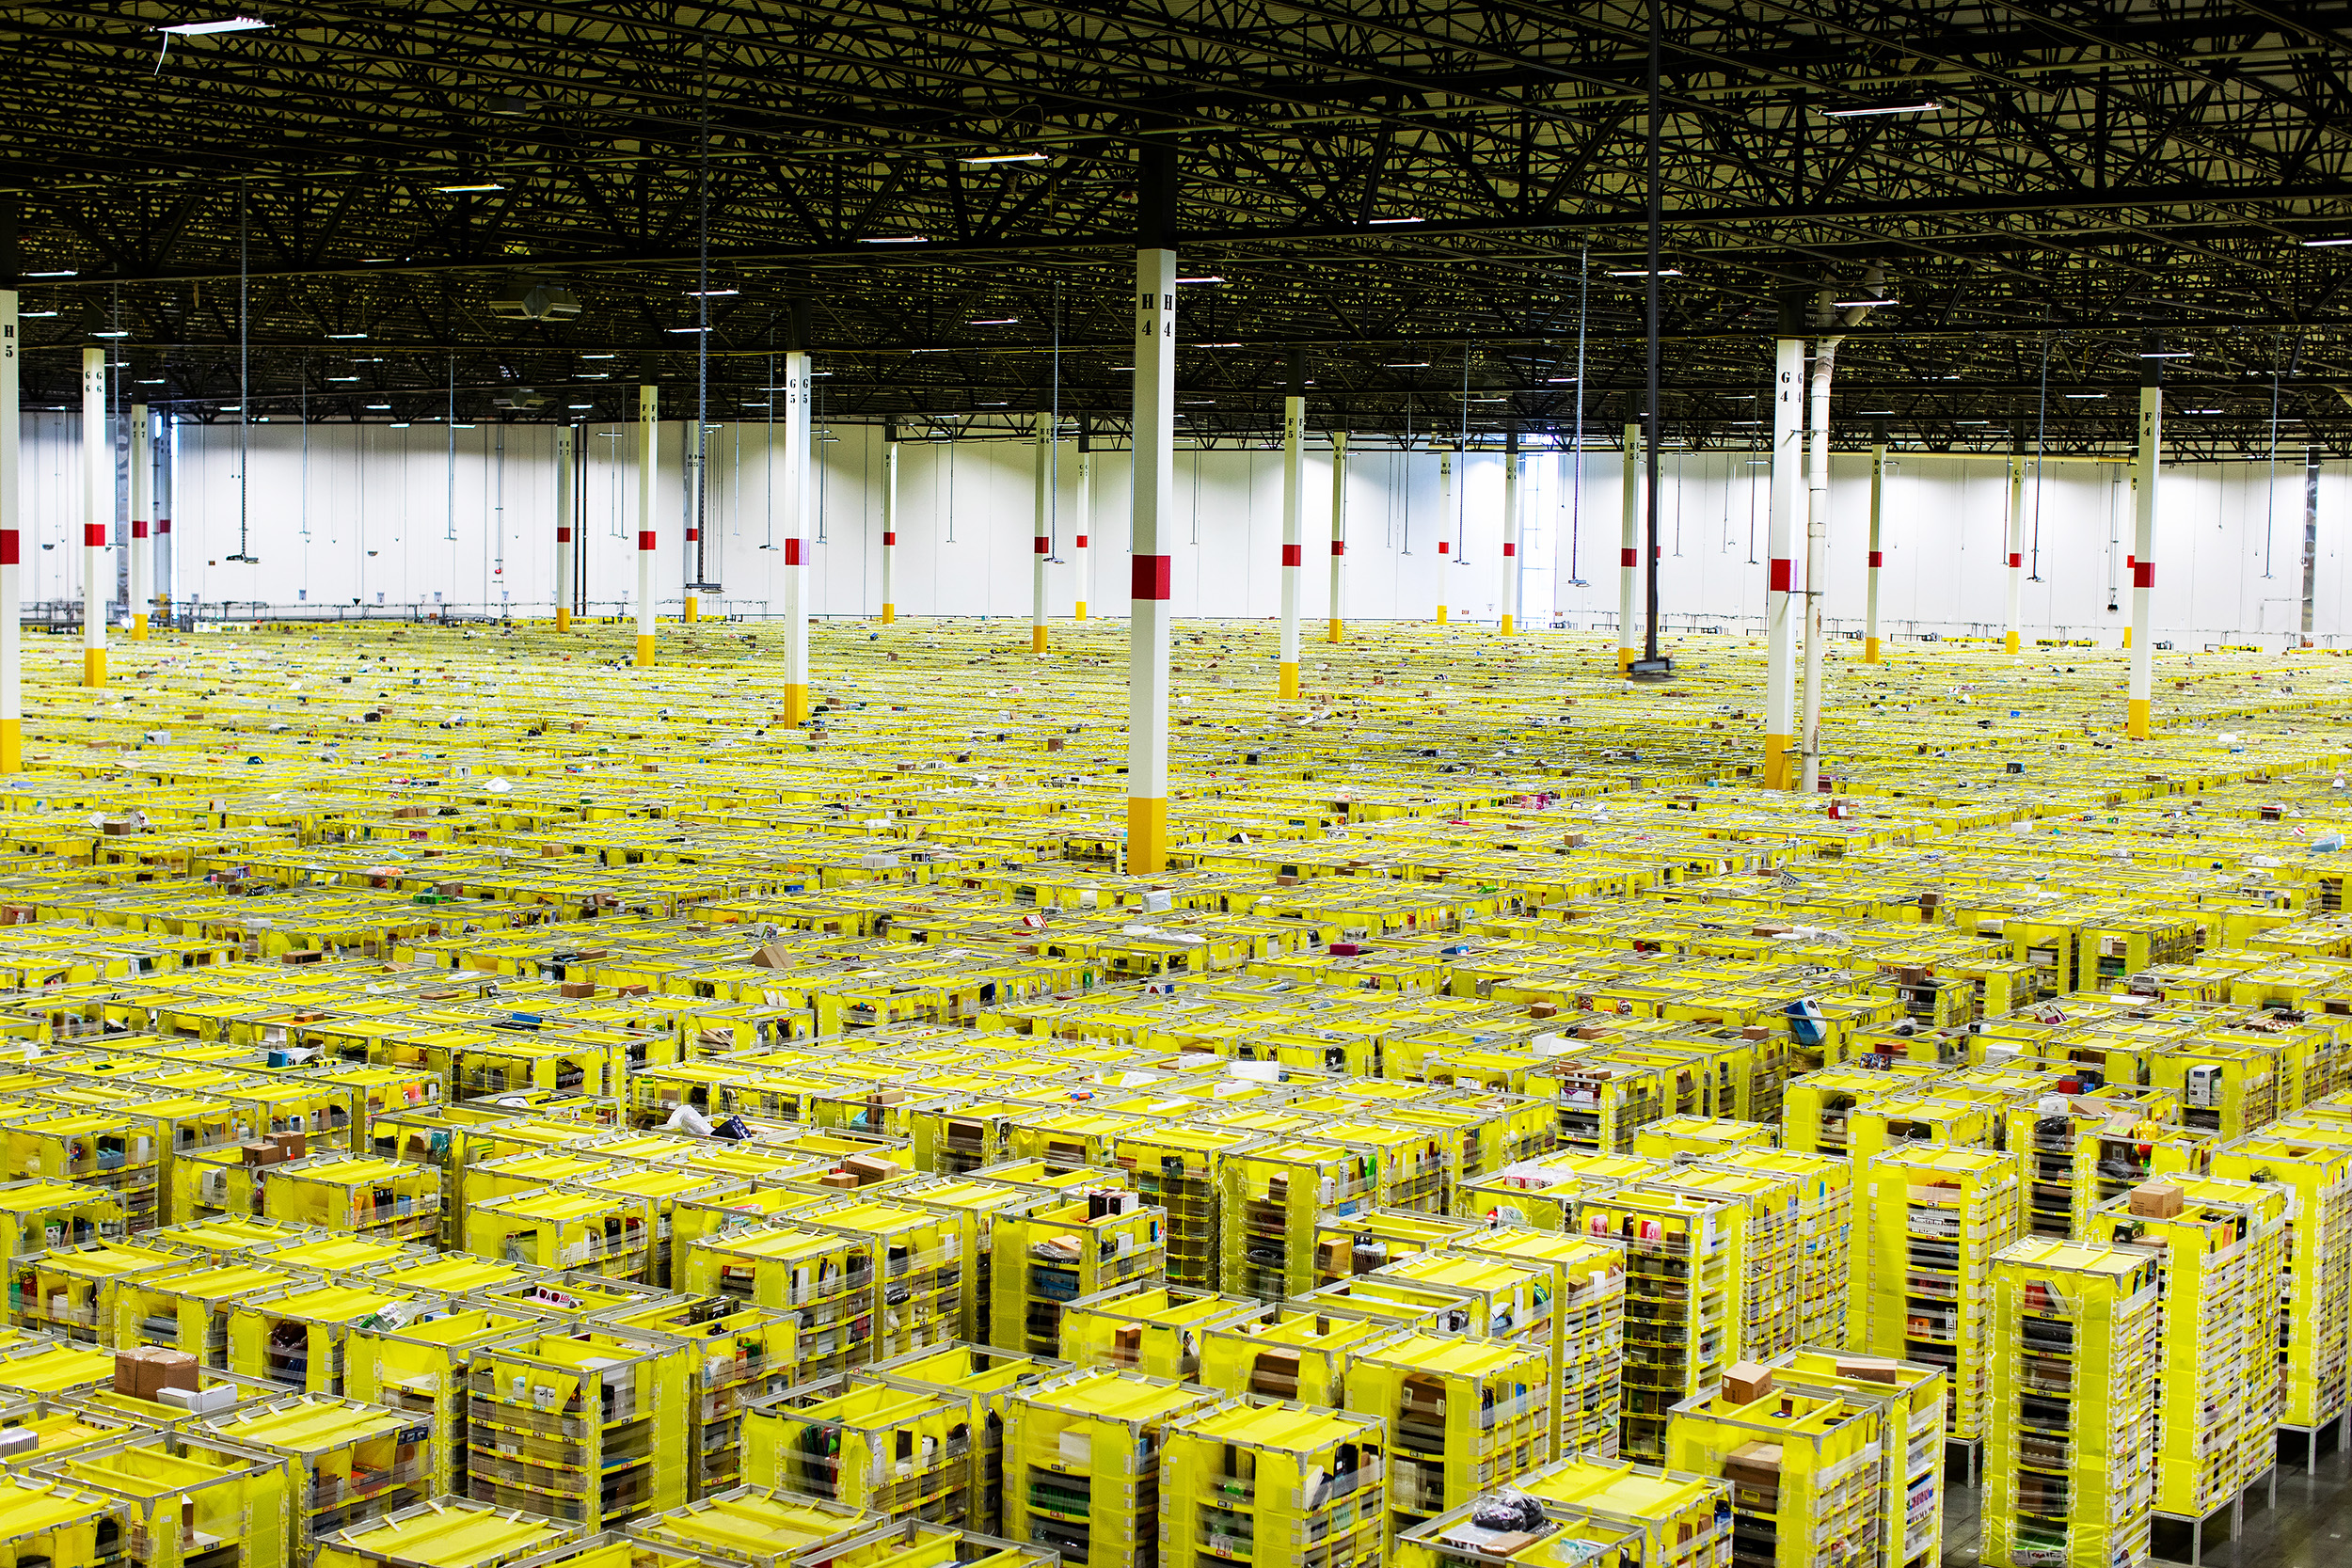  Shelves with product are organized and moved around by Amazon robots inside of the Amazon Fulfillment Center in Carteret, NJ. Workers sort products in different bins, box them and send them out for delivery. 